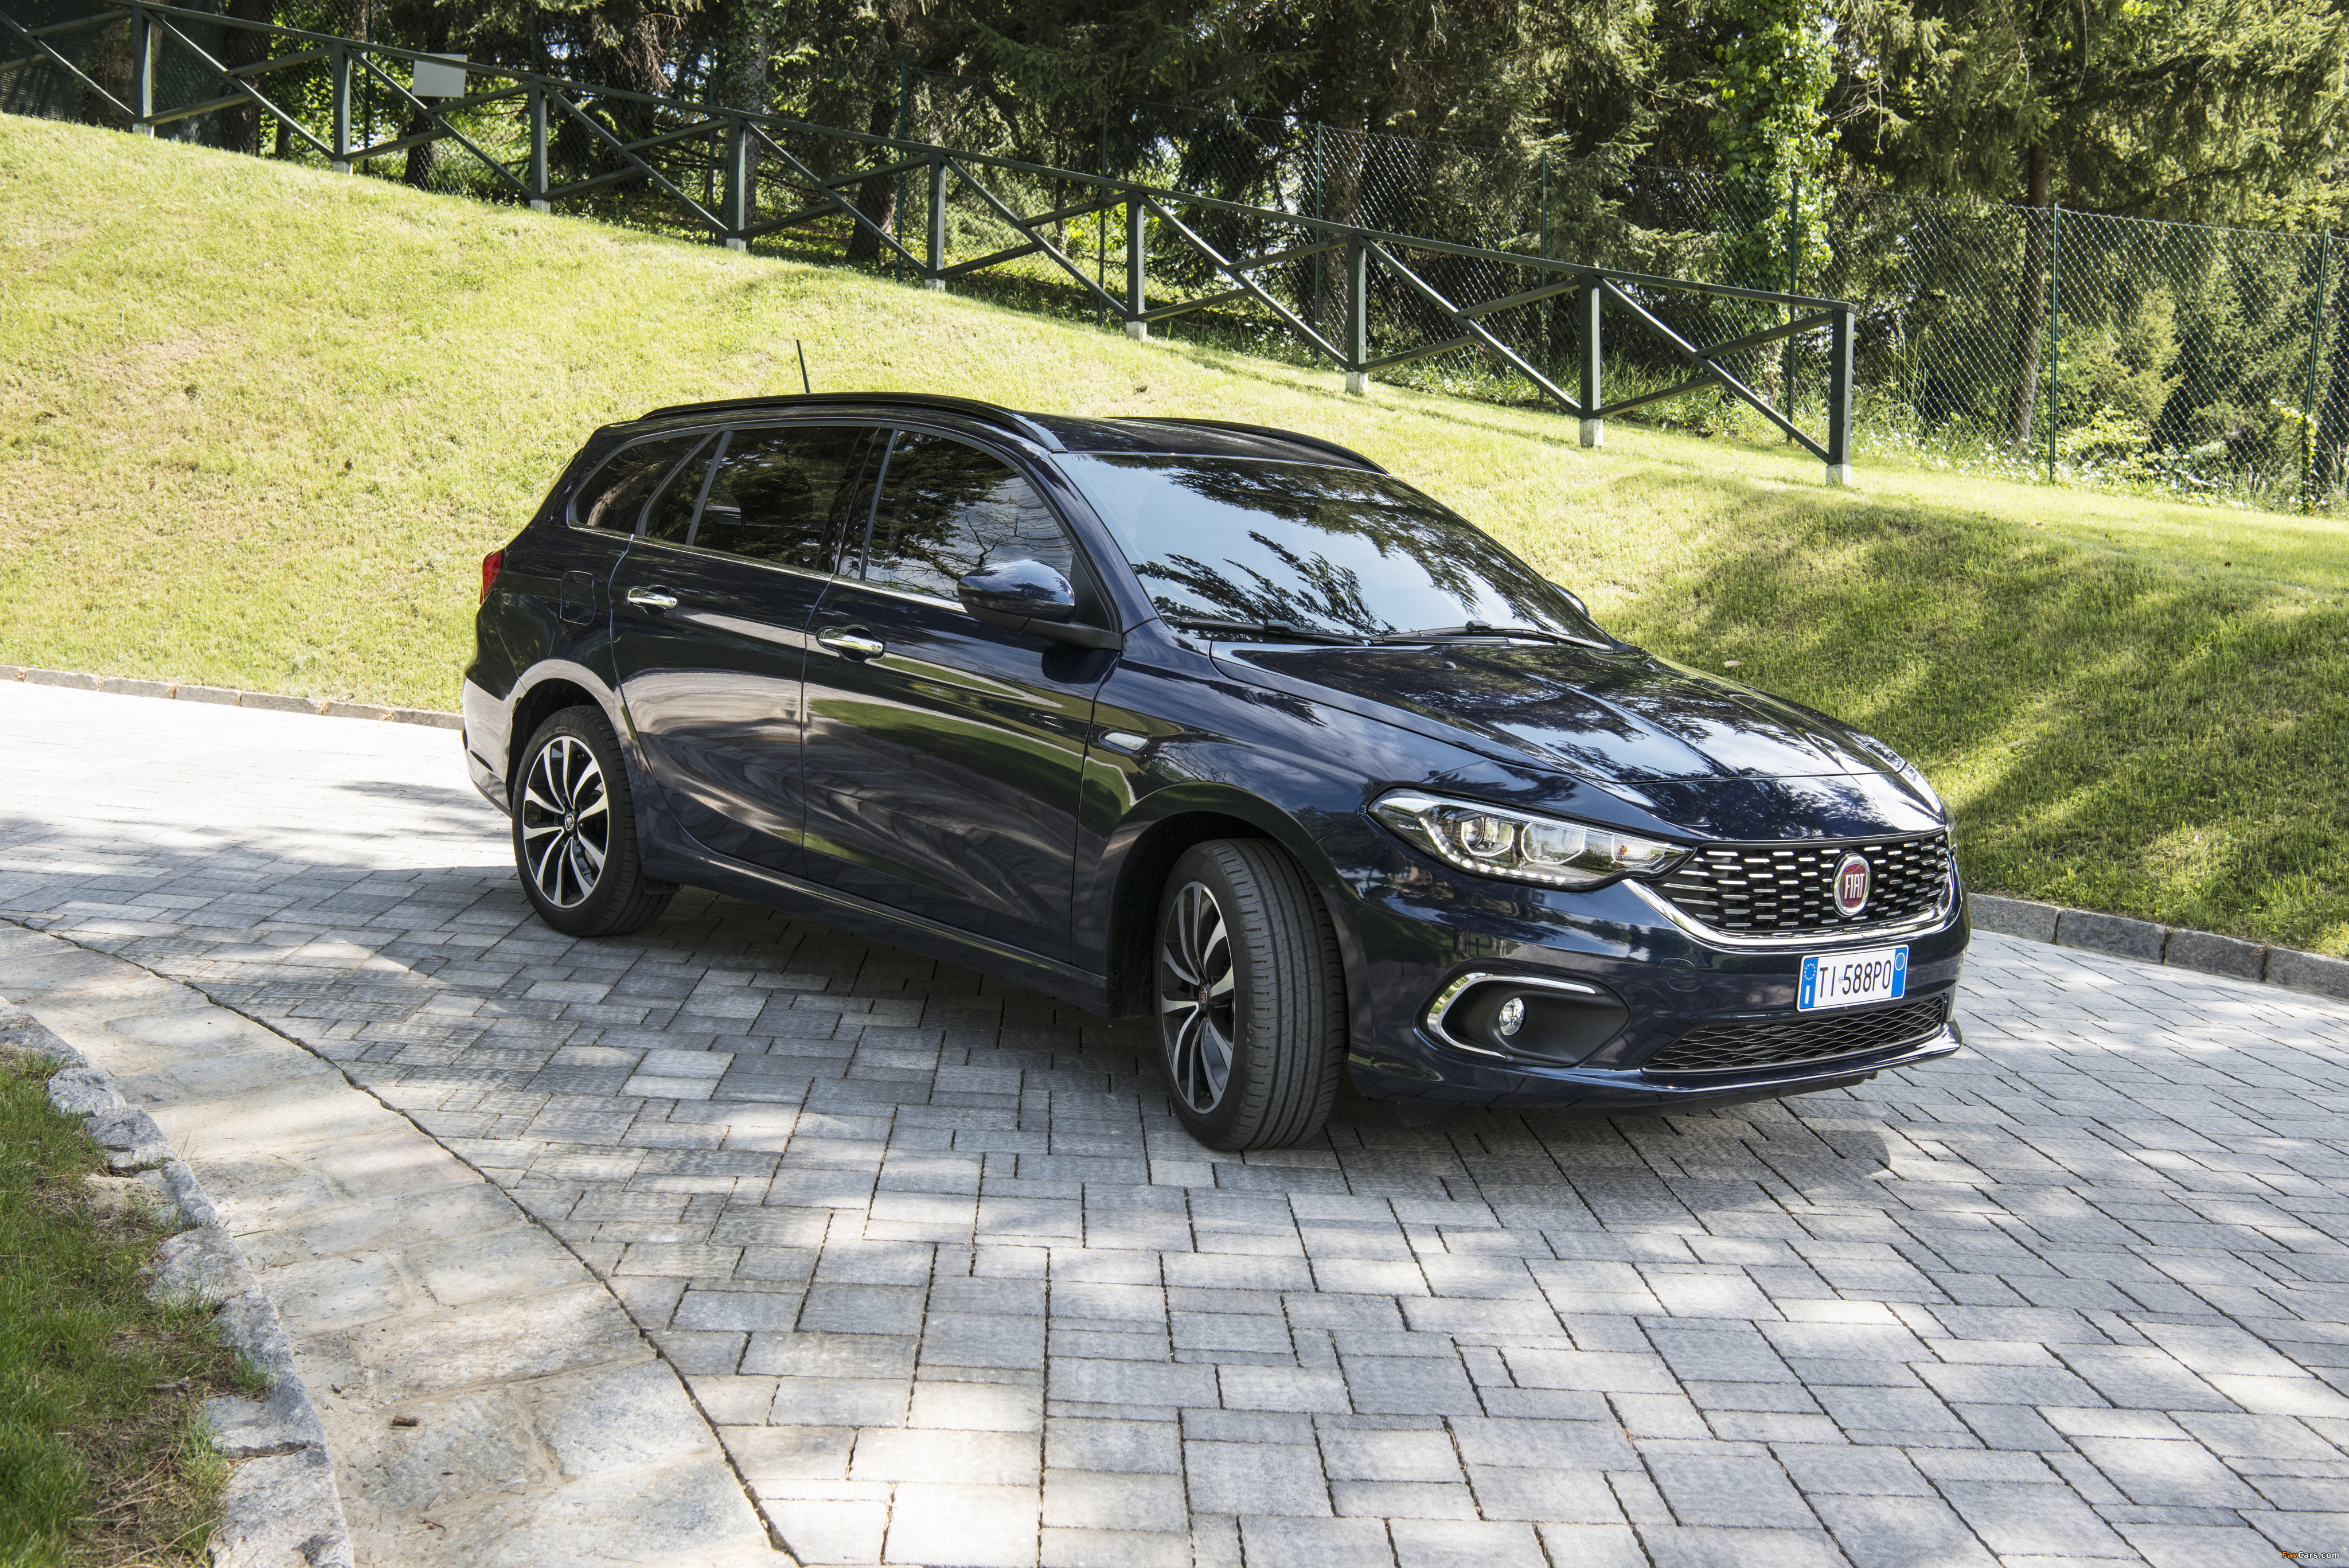 Fiat Tipo Station Wagon (357) 2016 pictures (4096 x 2734)